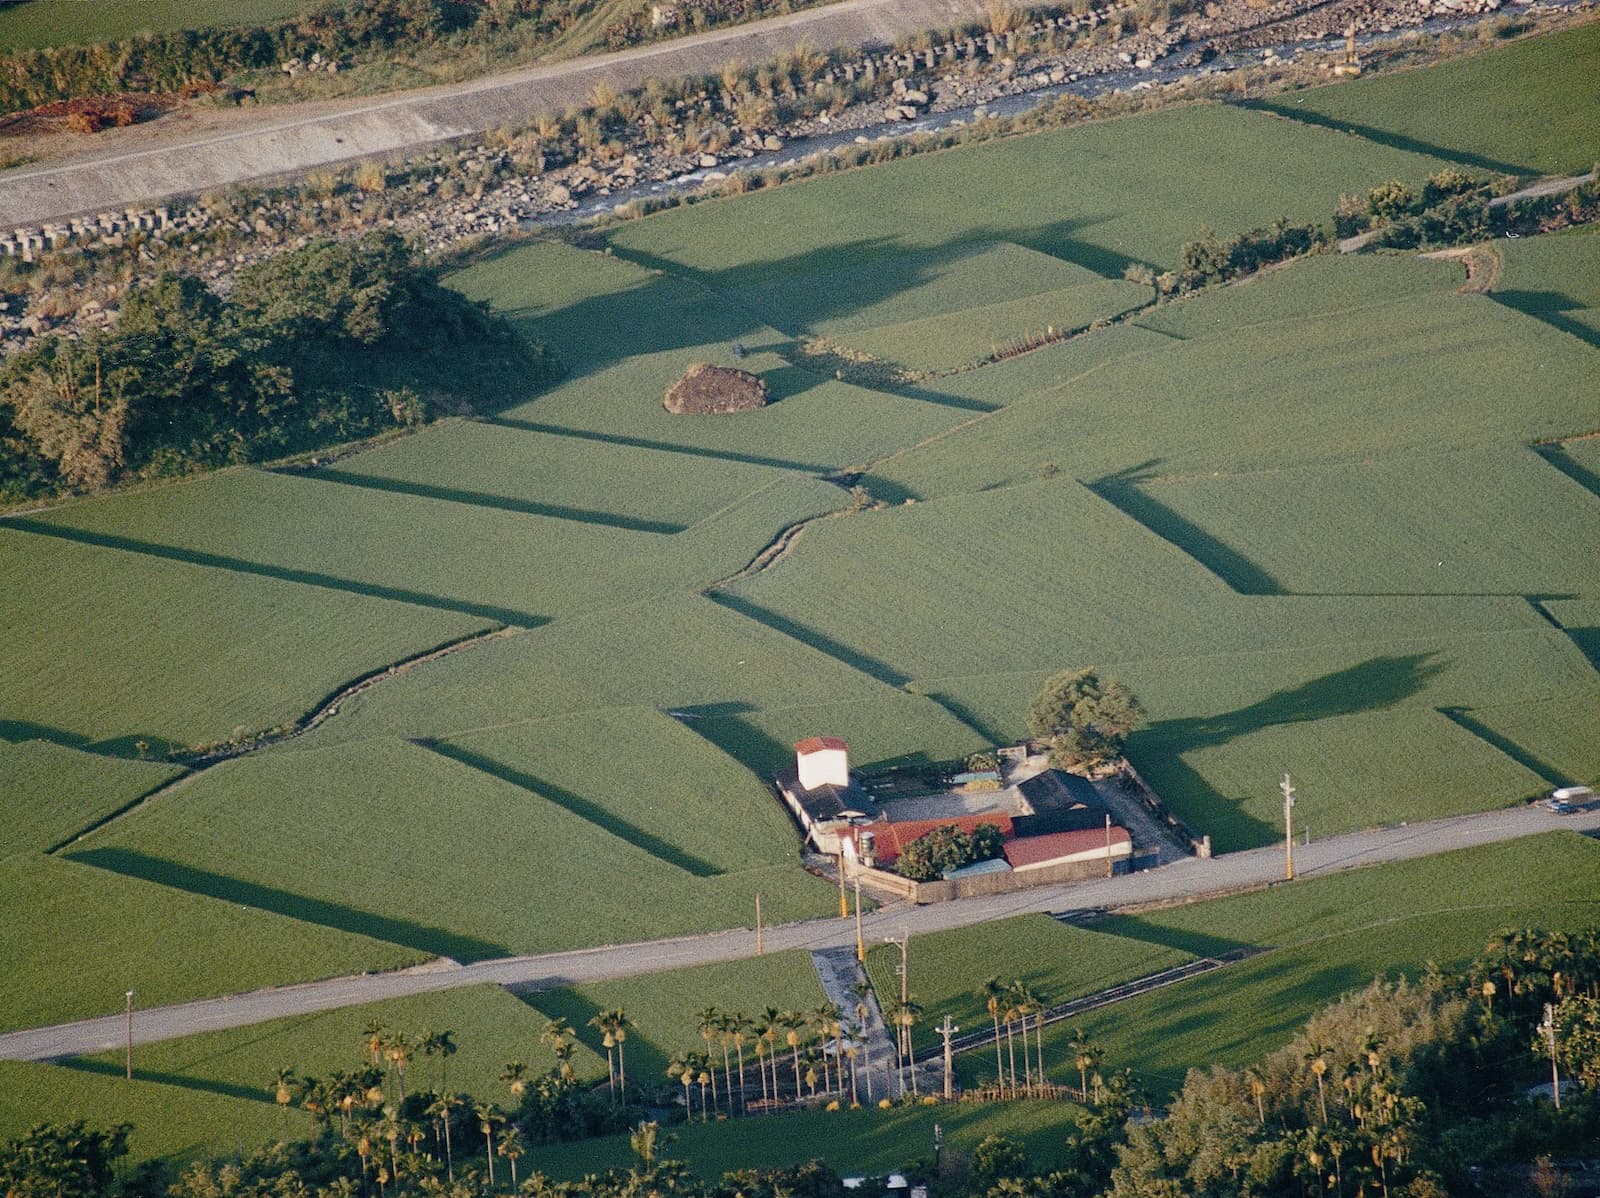 The rice paddy field overlooks the landscape, and the fields are aligned vertically and horizontally. Each farmland irrigation association served an indispensable role in the successful development of agriculture in Taiwan.